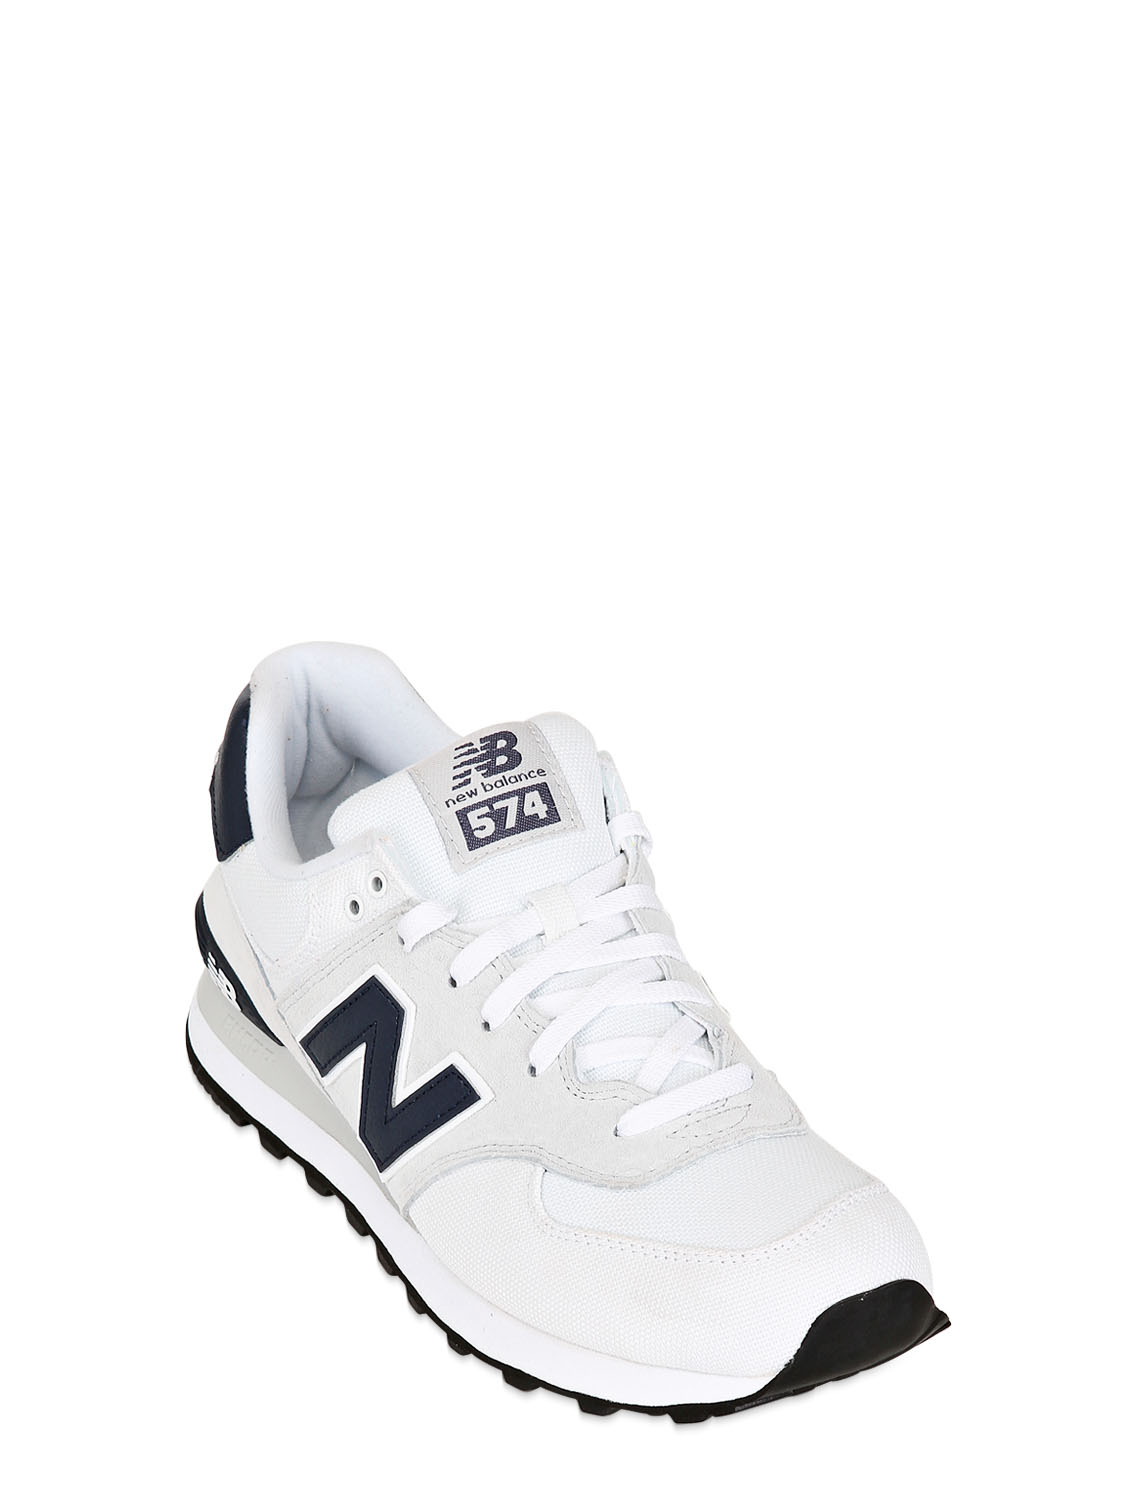 new balance white suede and canvas 574 